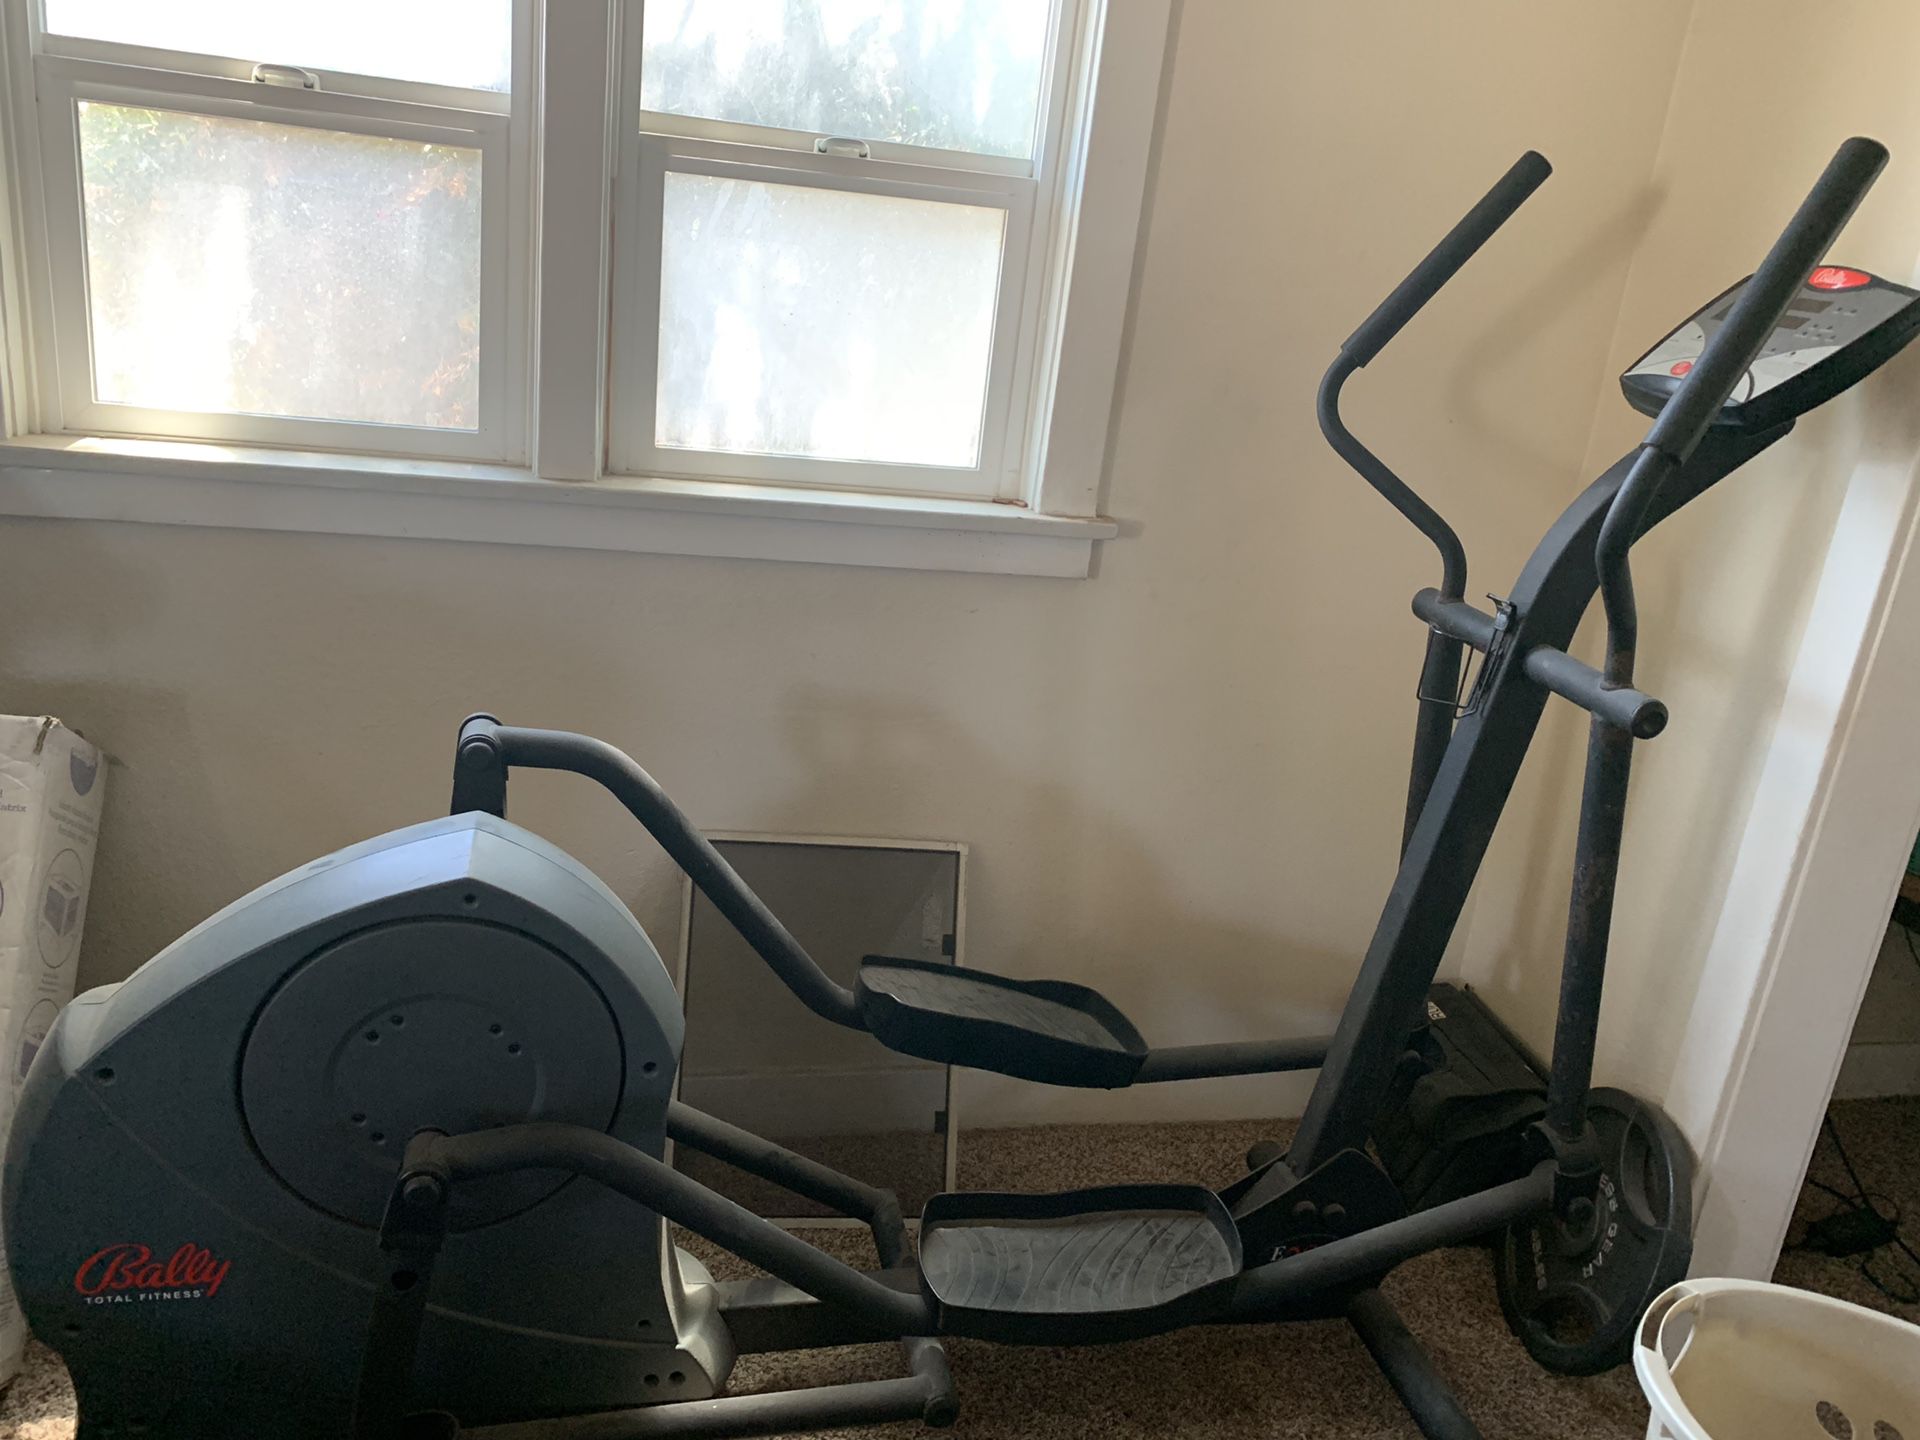 Bally Elliptical and the AB coaster max $60 for the elliptical and $25for the AB machine or $80for both